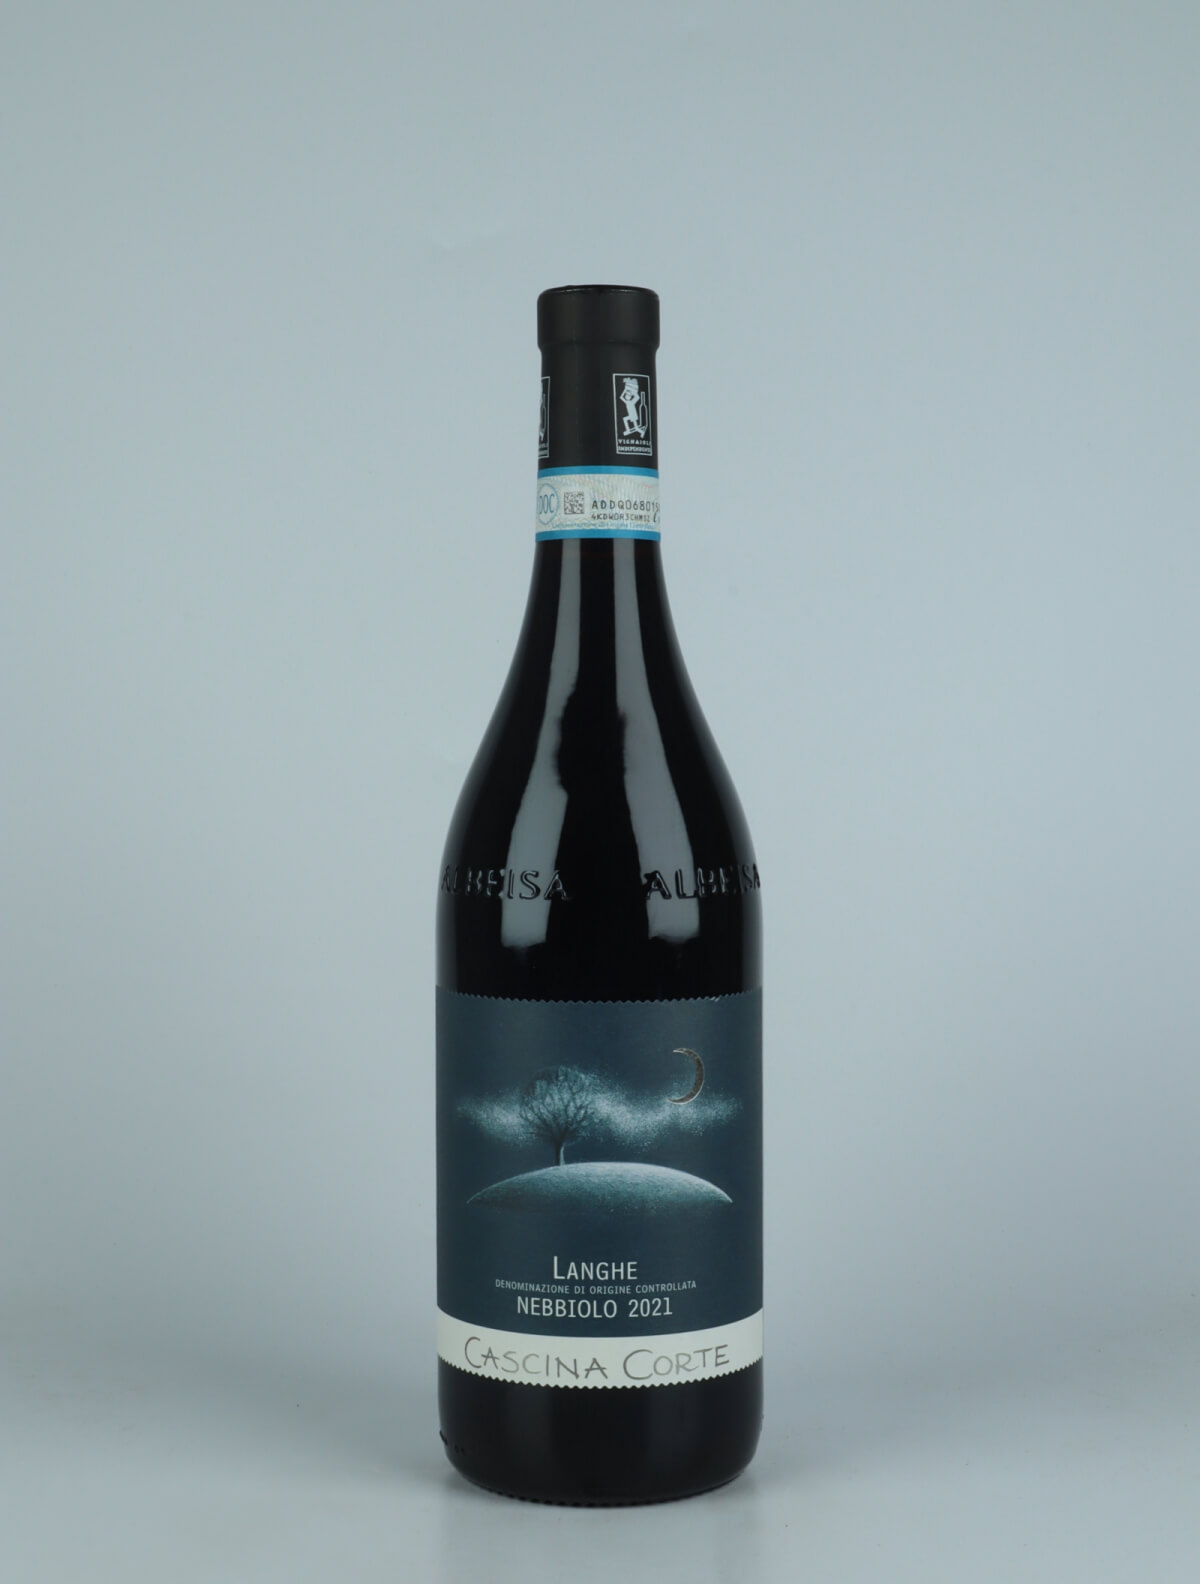 A bottle 2021 Langhe Nebbiolo Red wine from Cascina Corte, Piedmont in Italy